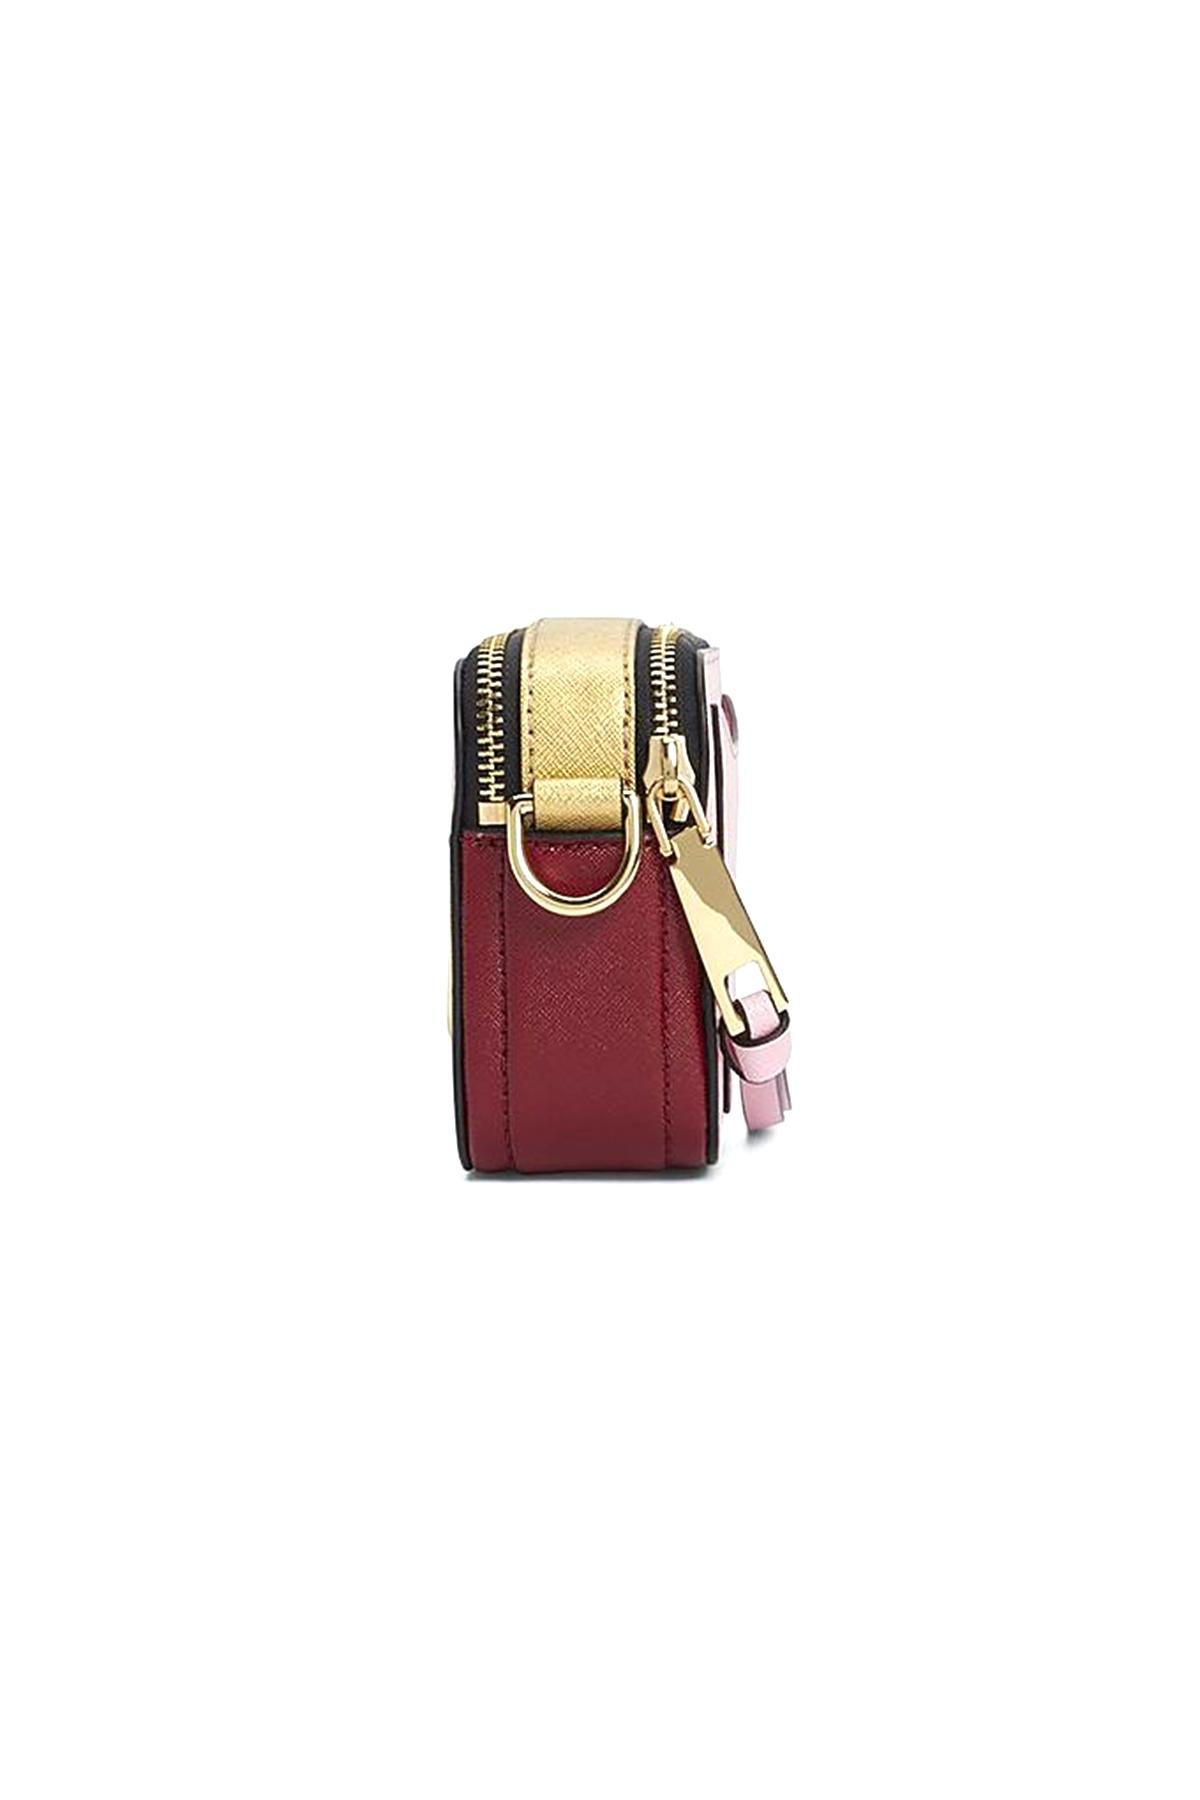 Marc Jacobs Leather Snapshot Bag In Baby Pink/red - Lyst